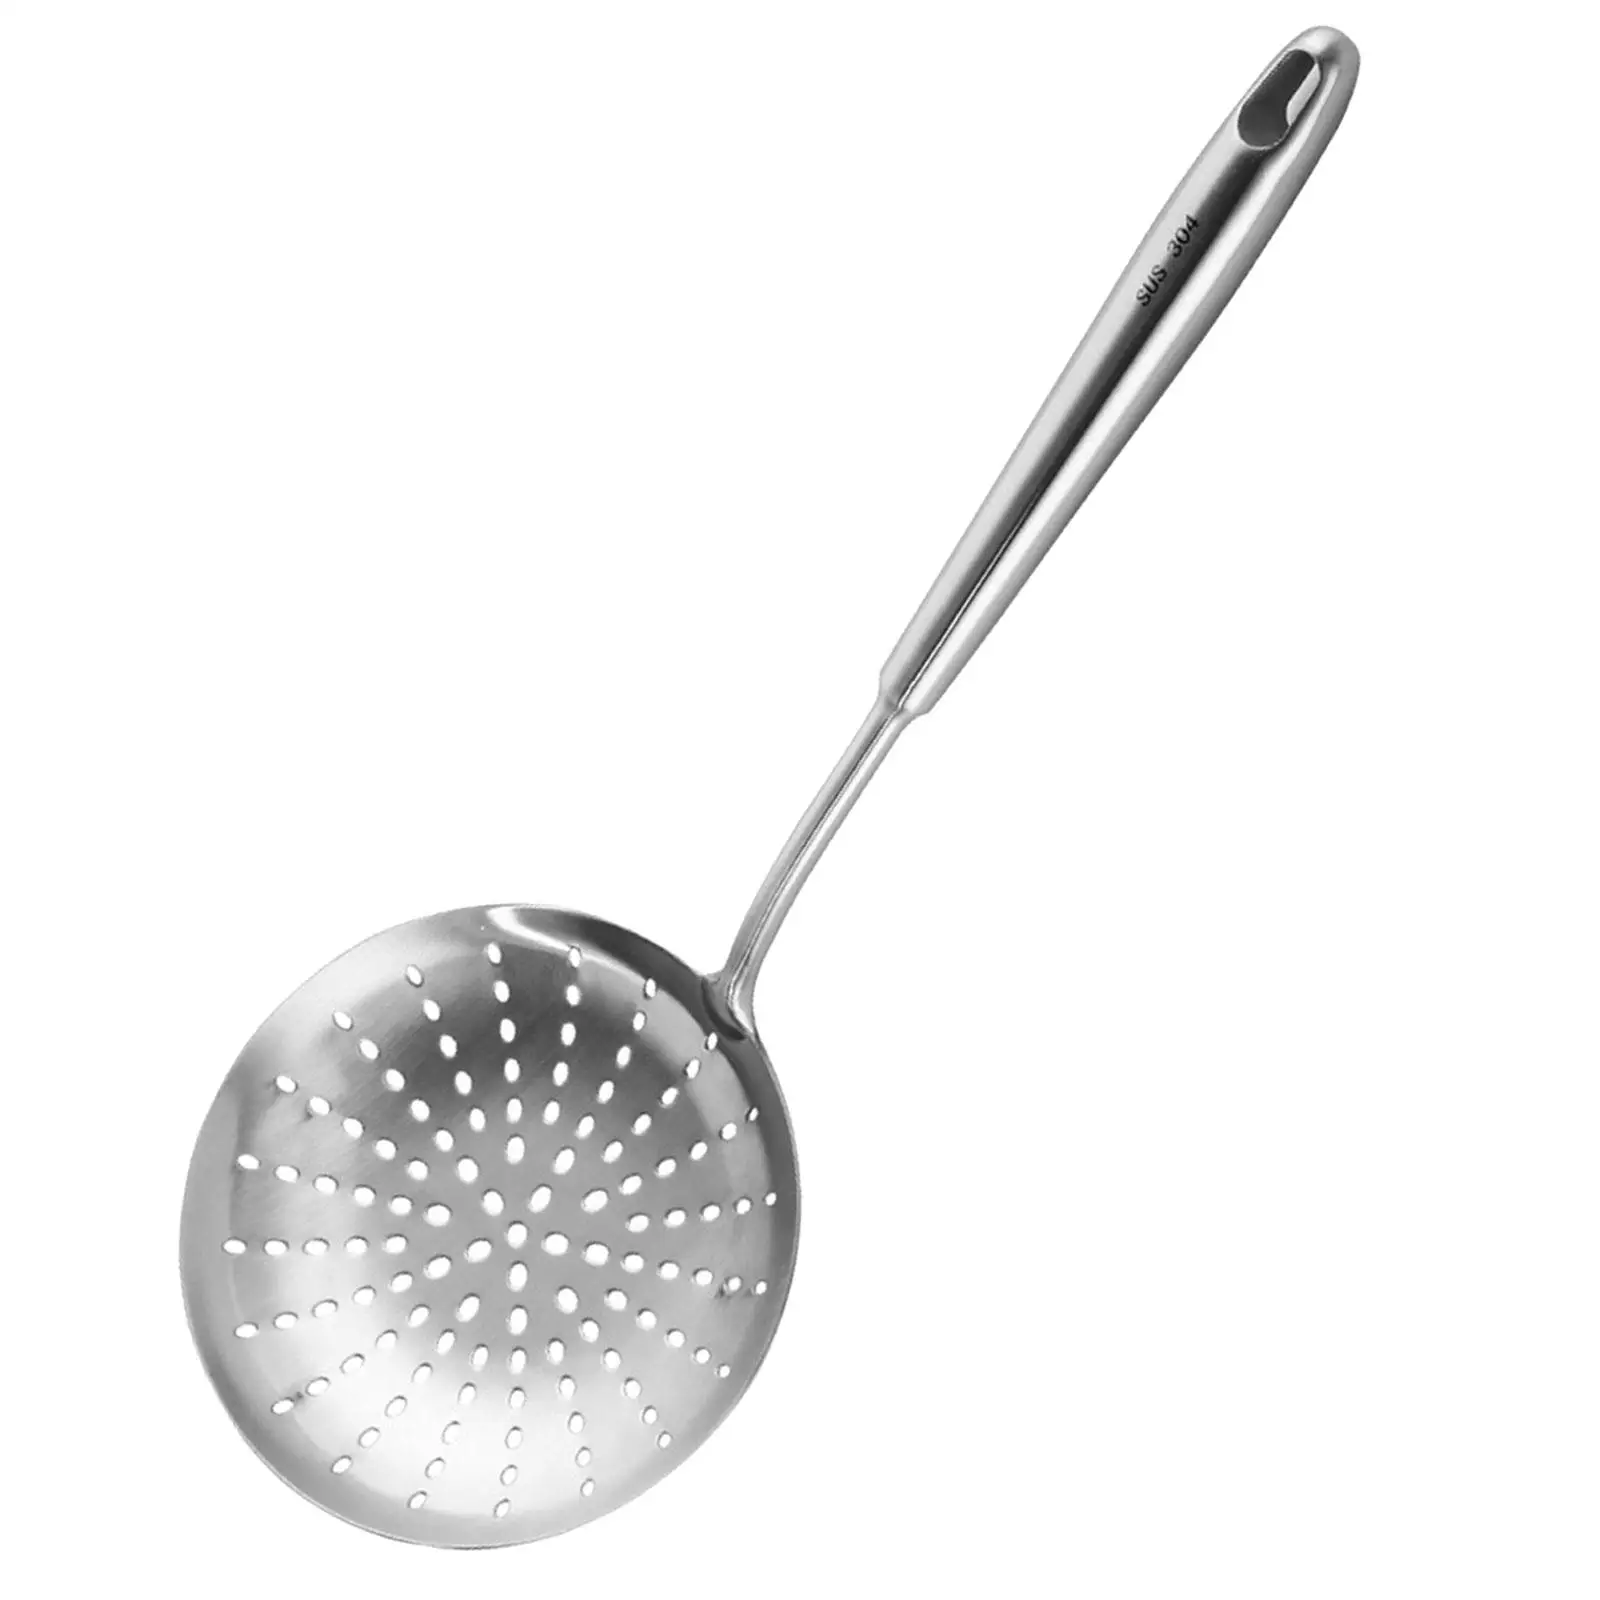 Stainless Steel Skimmer Slotted Spoon Multifunctional Cooking Colander Spoon for Draining Frying Noodles Pasta Scooping 15.9cm